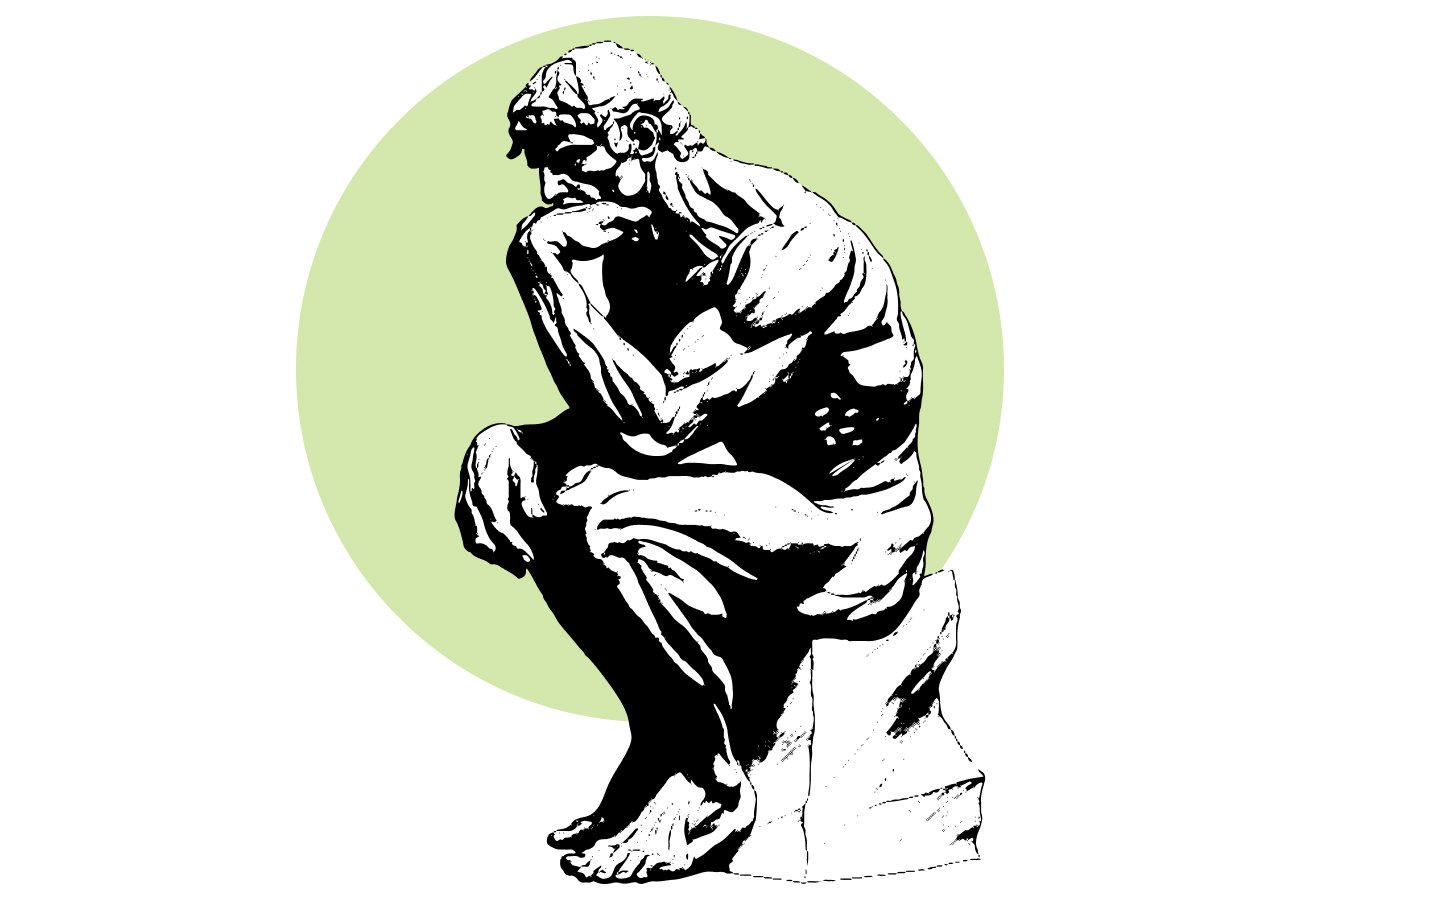 A statue of The Thinker